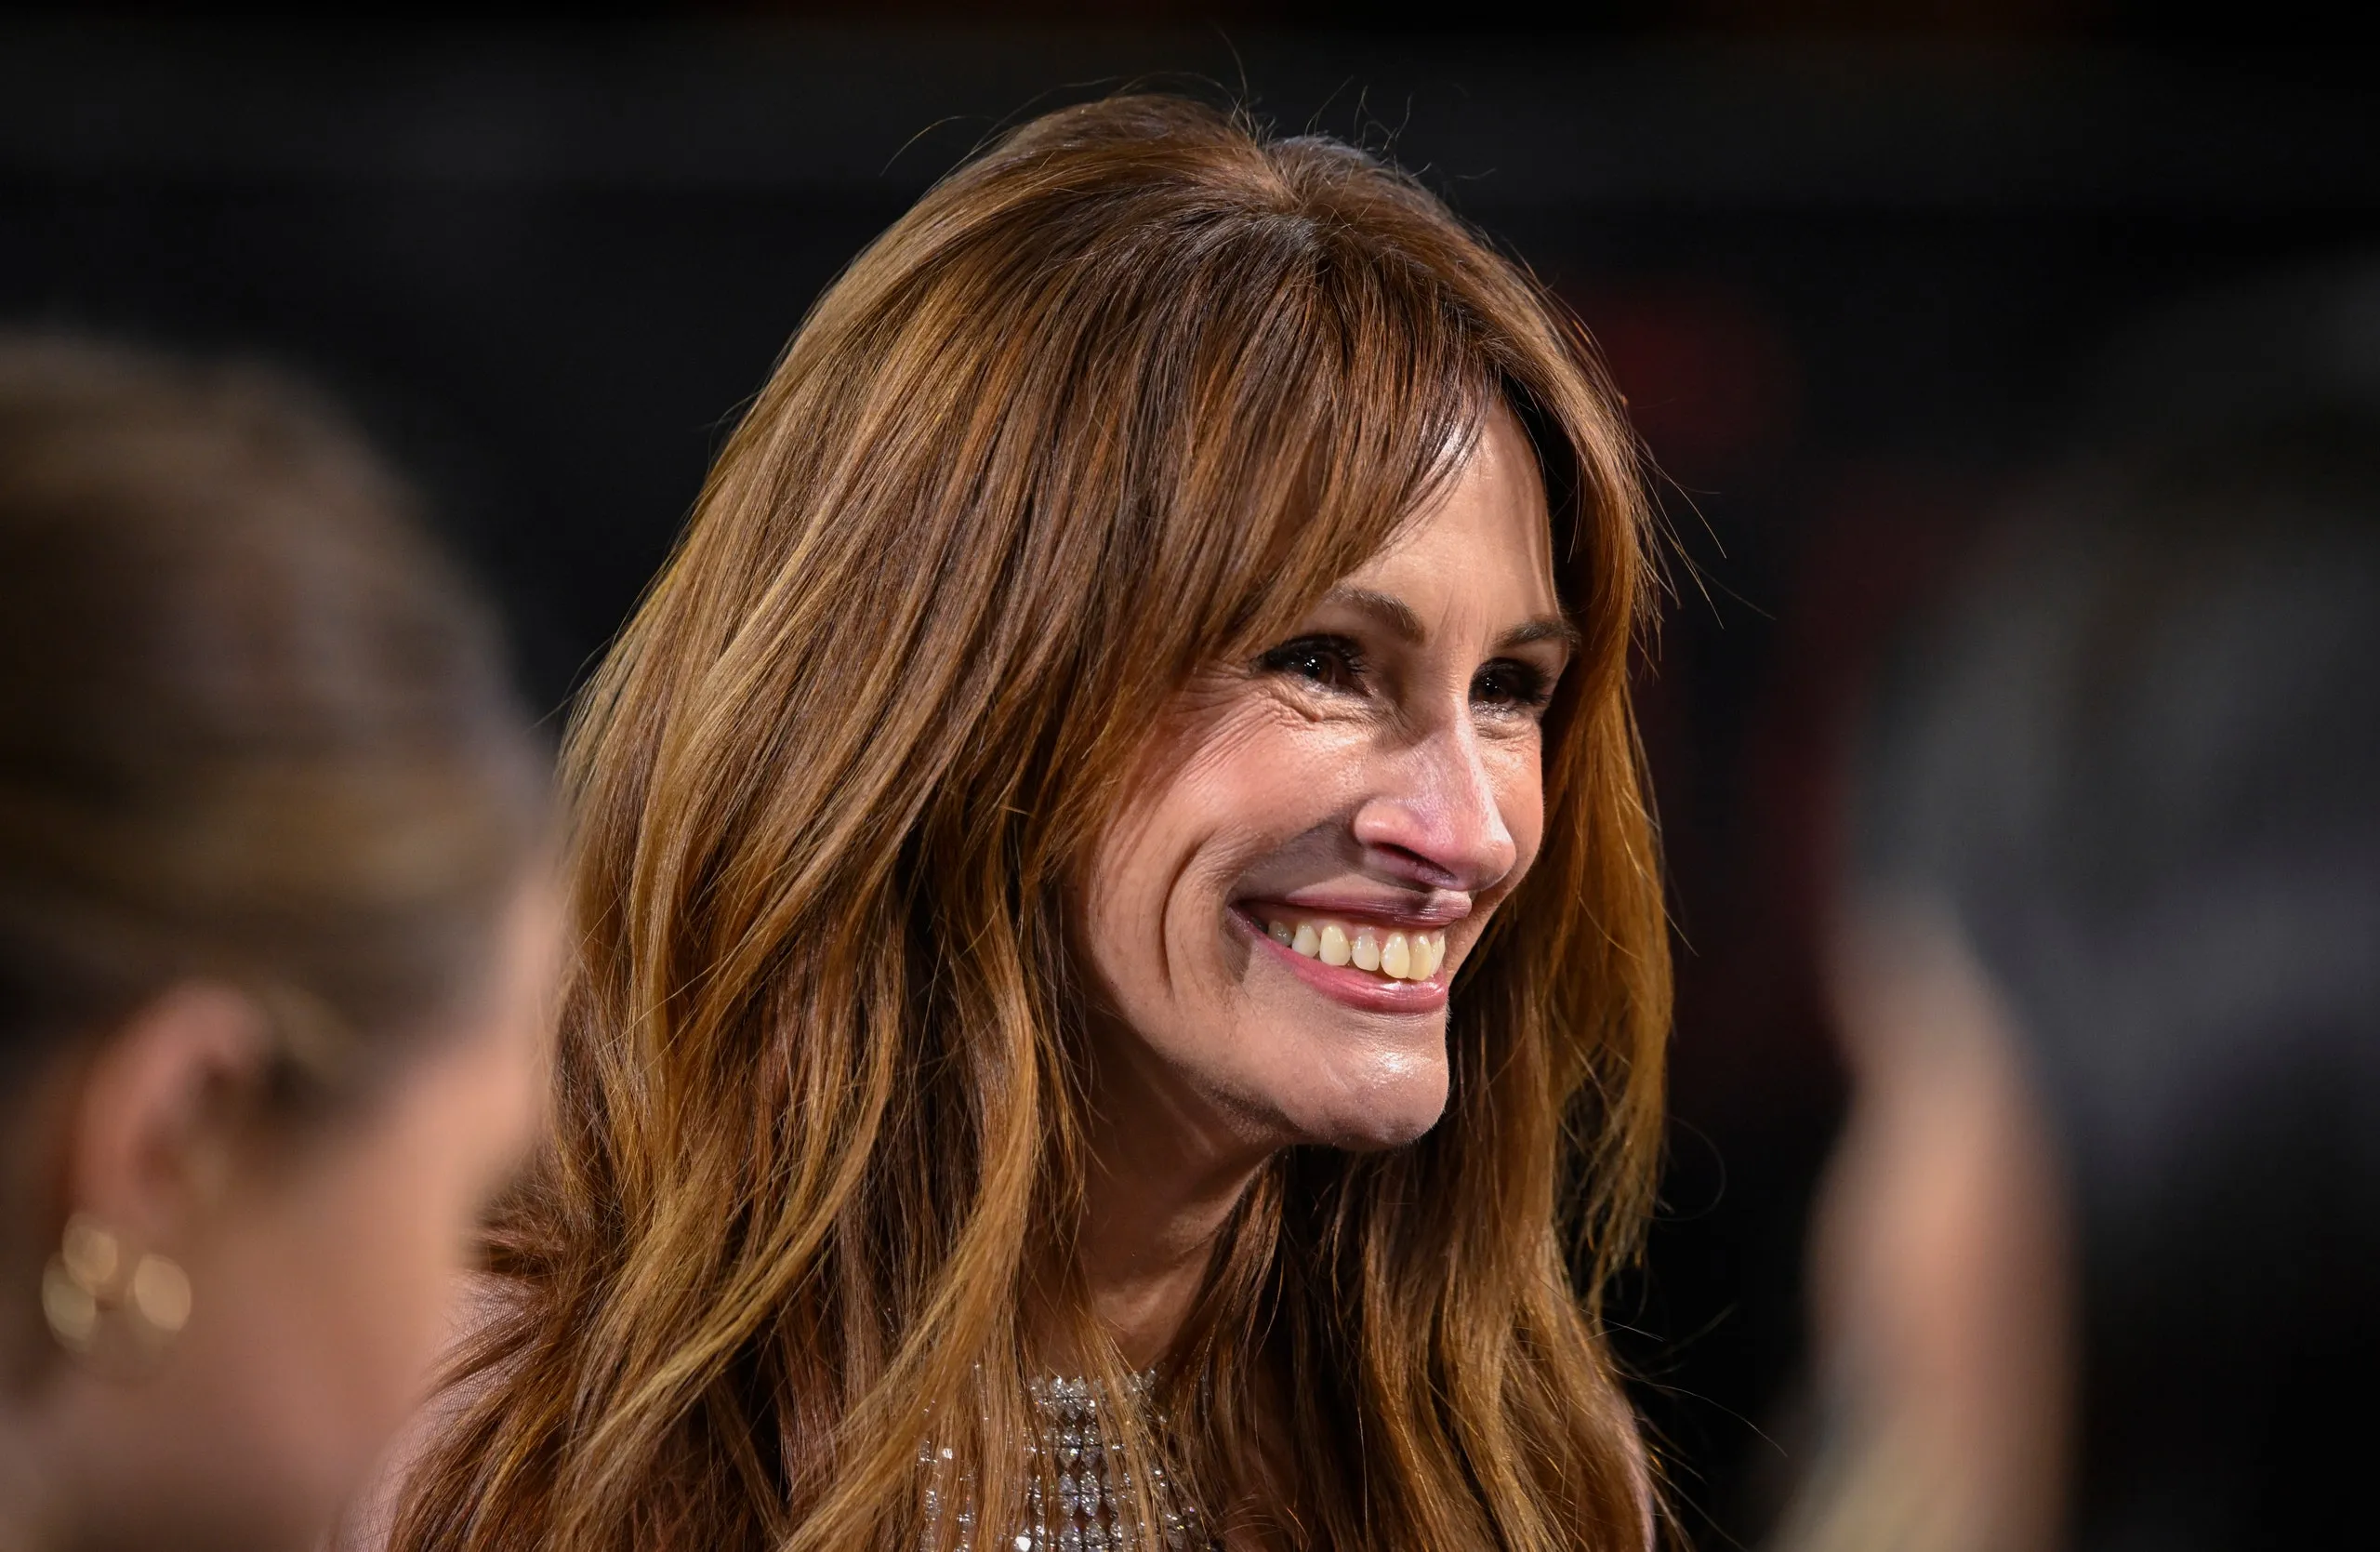 Julia Roberts Dating History (Complete List of Boyfriends to Husband)